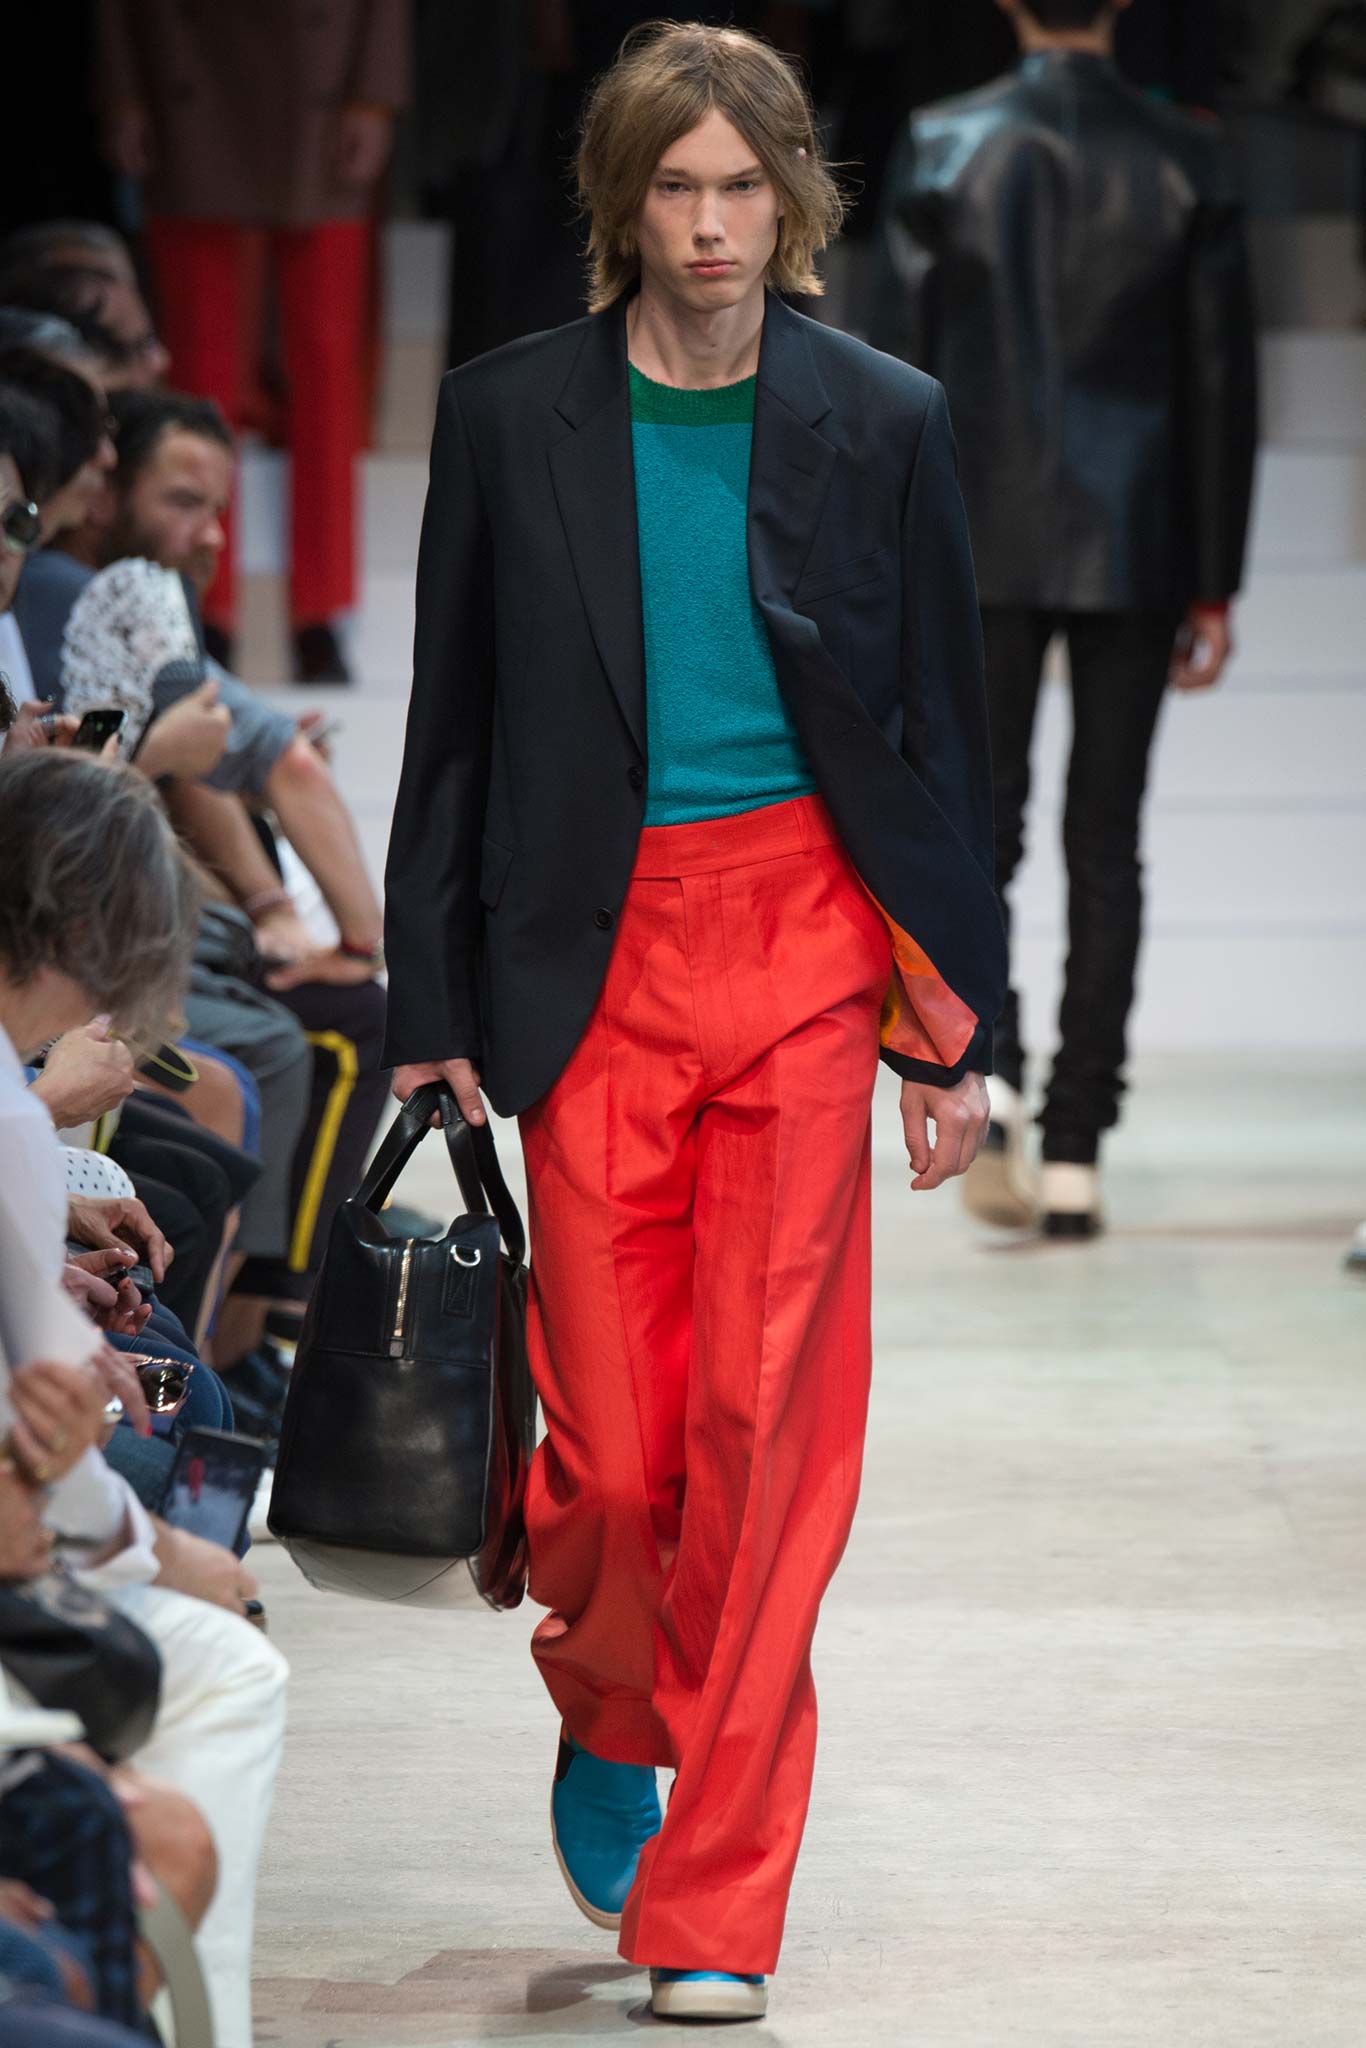 Paul Smith Spring/Summer 2016 Paris - Fashionably Male